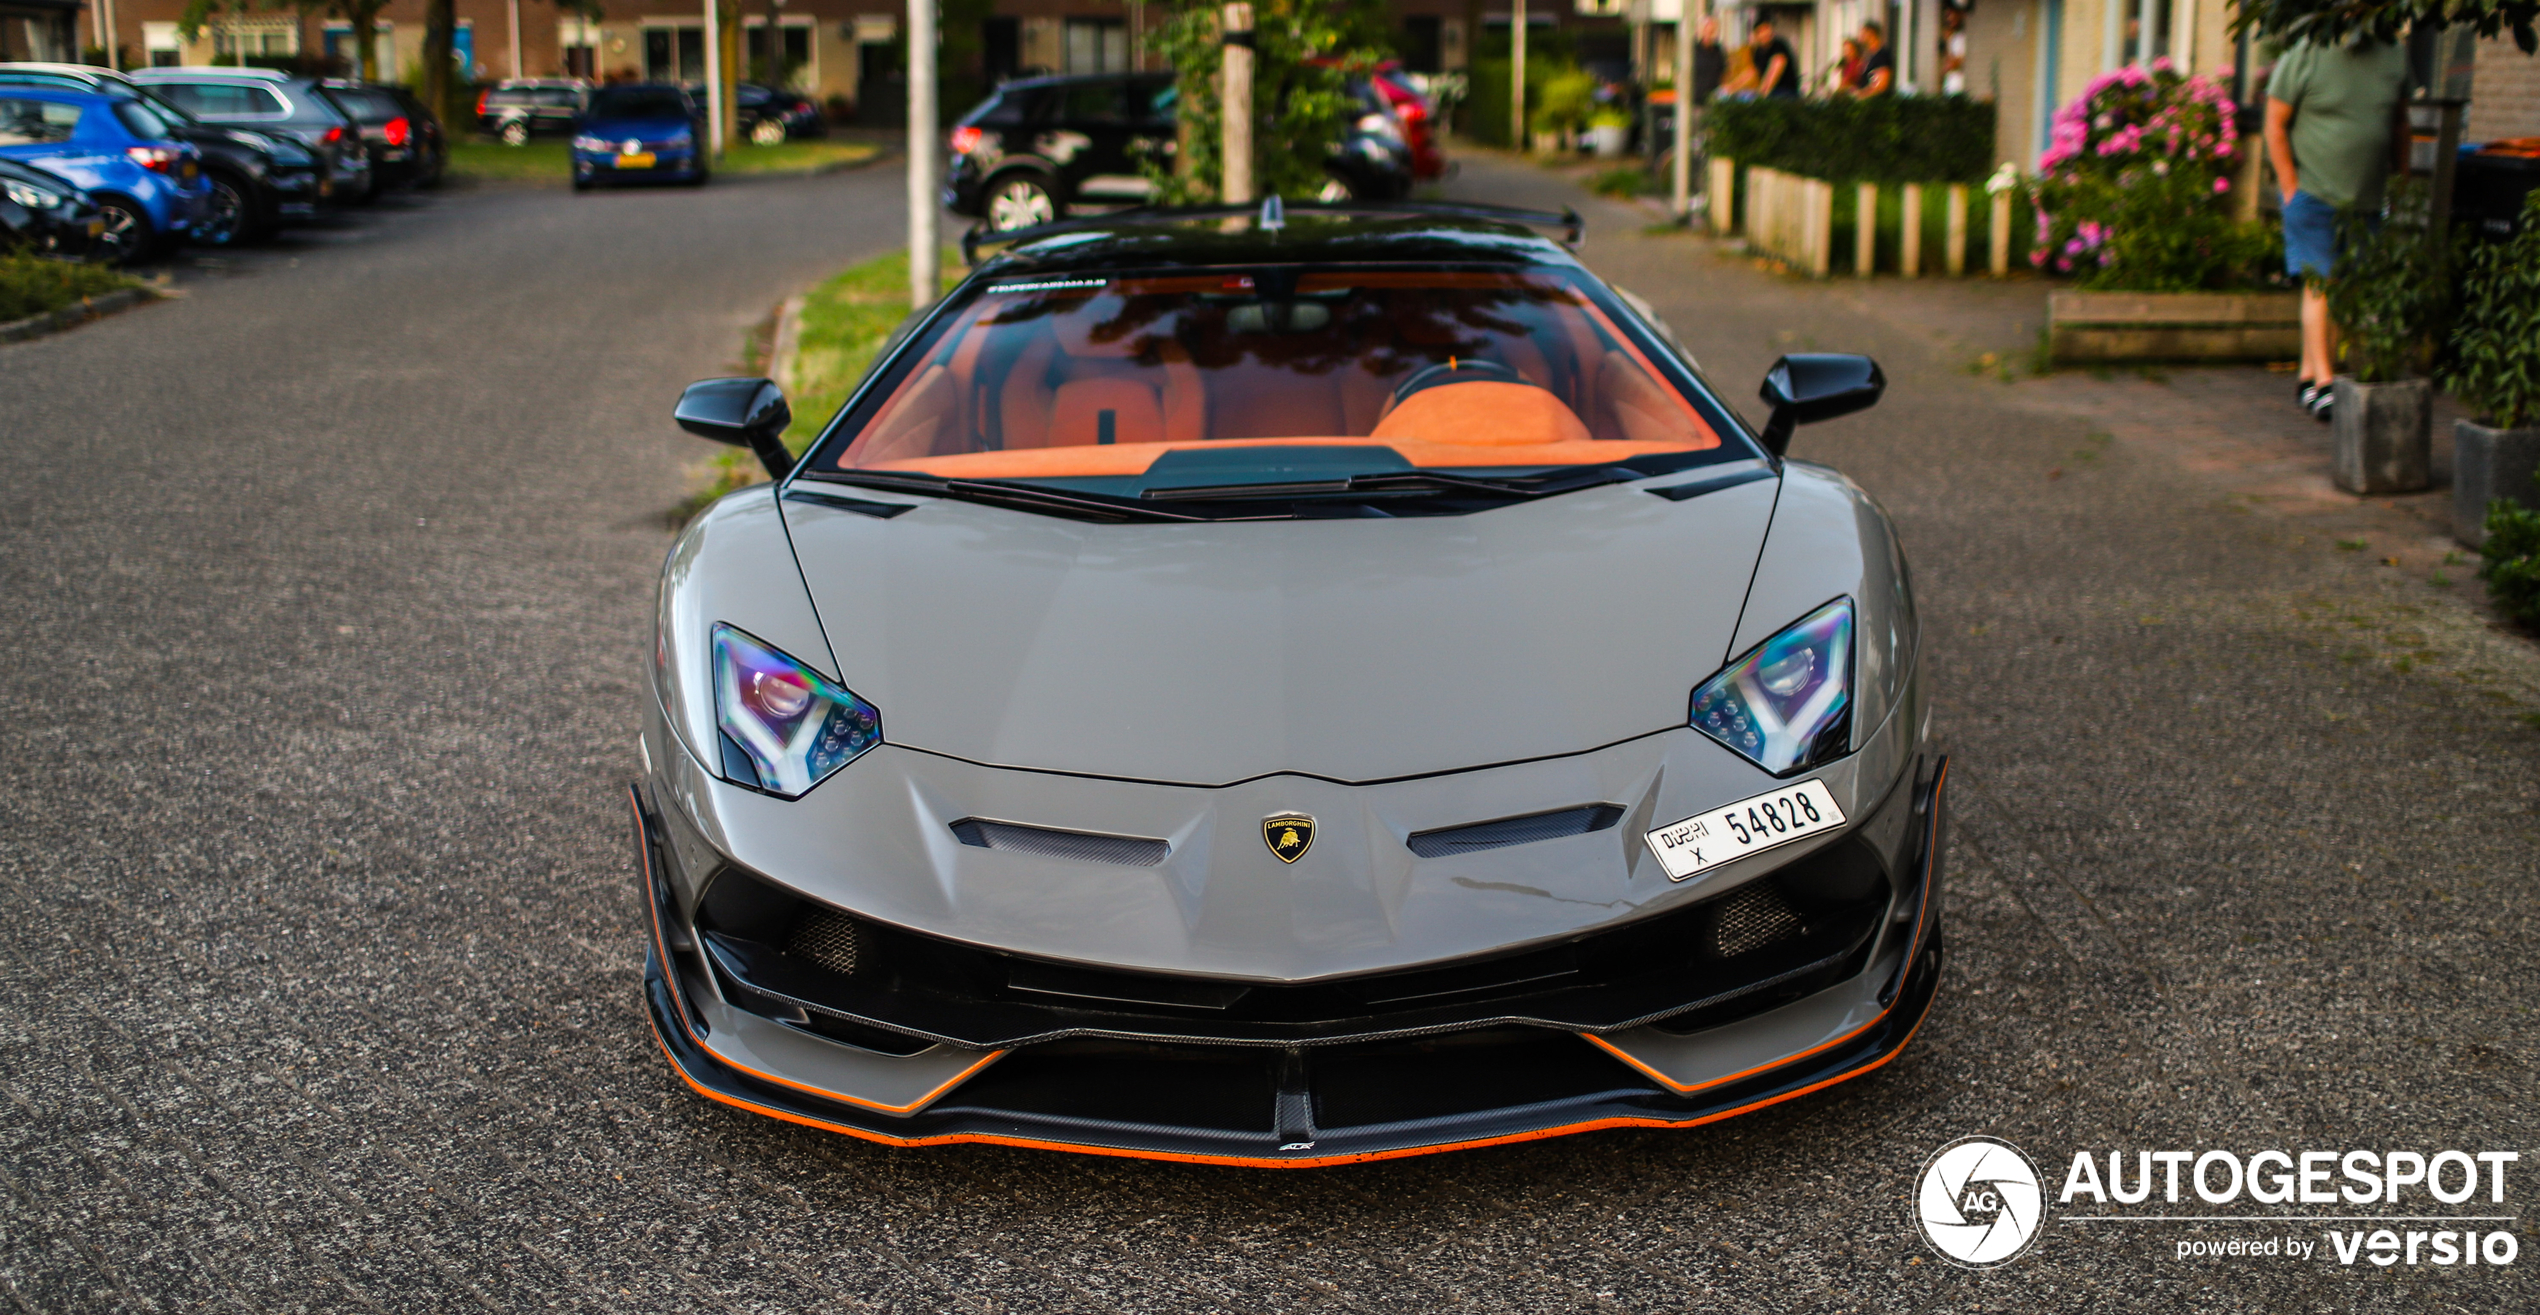 A attractive Aventador SVJ has made an appearance in Amersfoort.